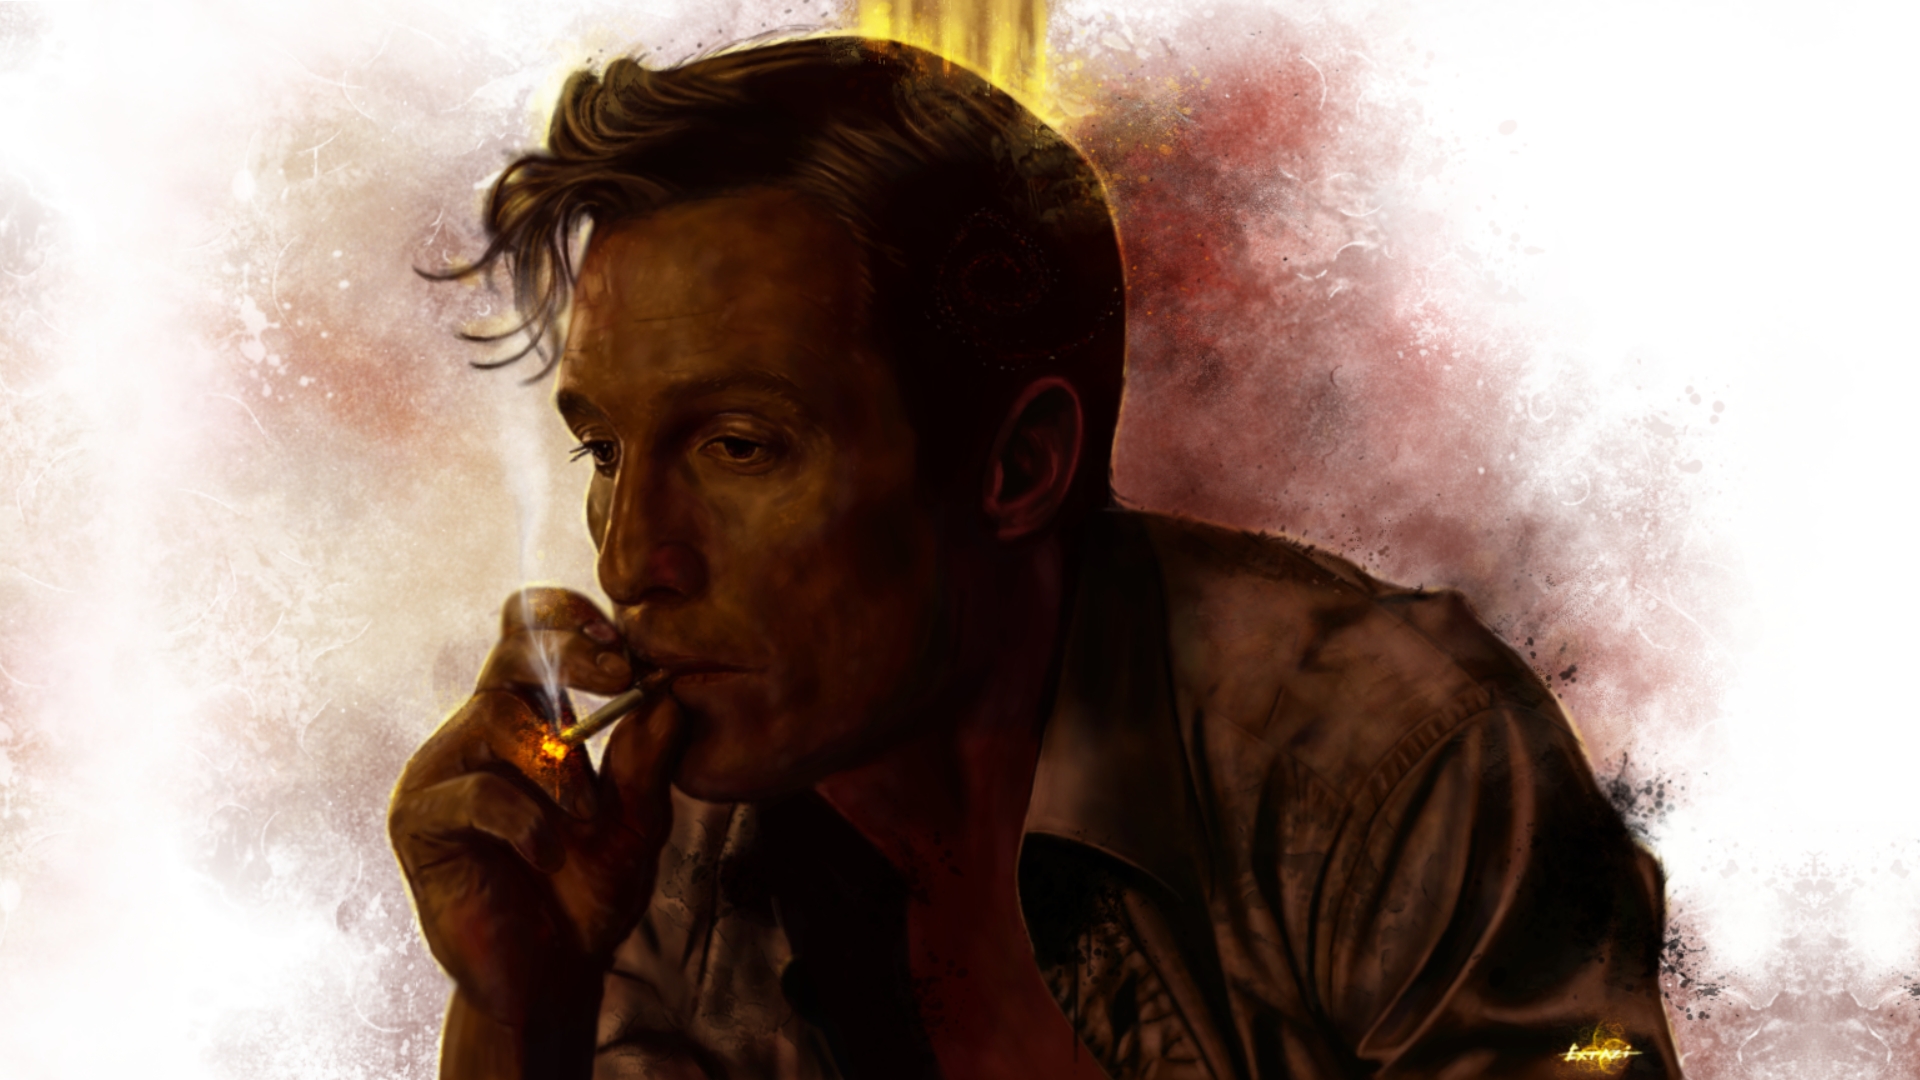 Rust and cohle фото 6